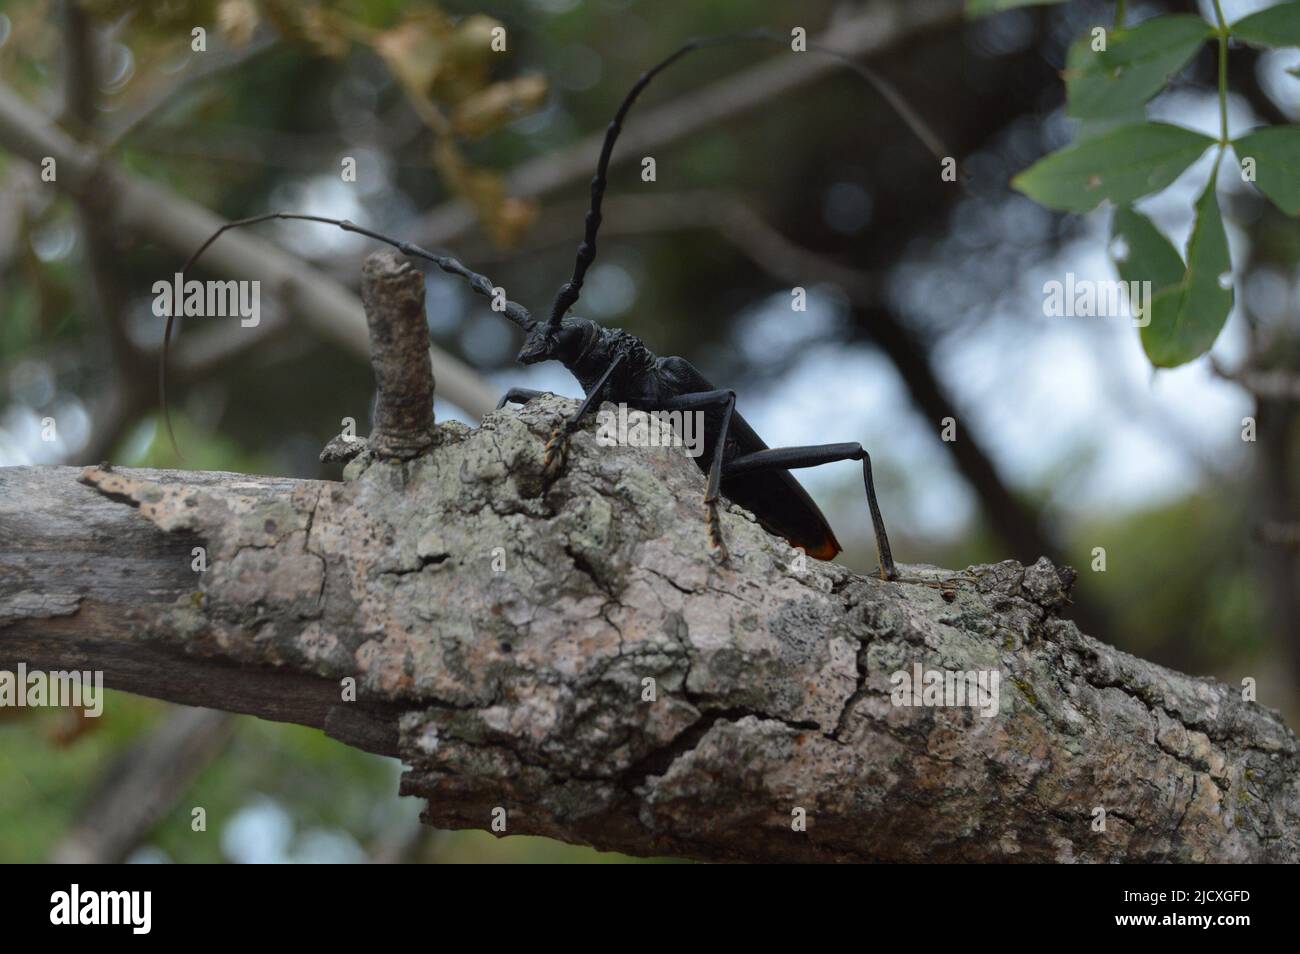 Big black beetle with long whiskers sits on branch Stock Photo